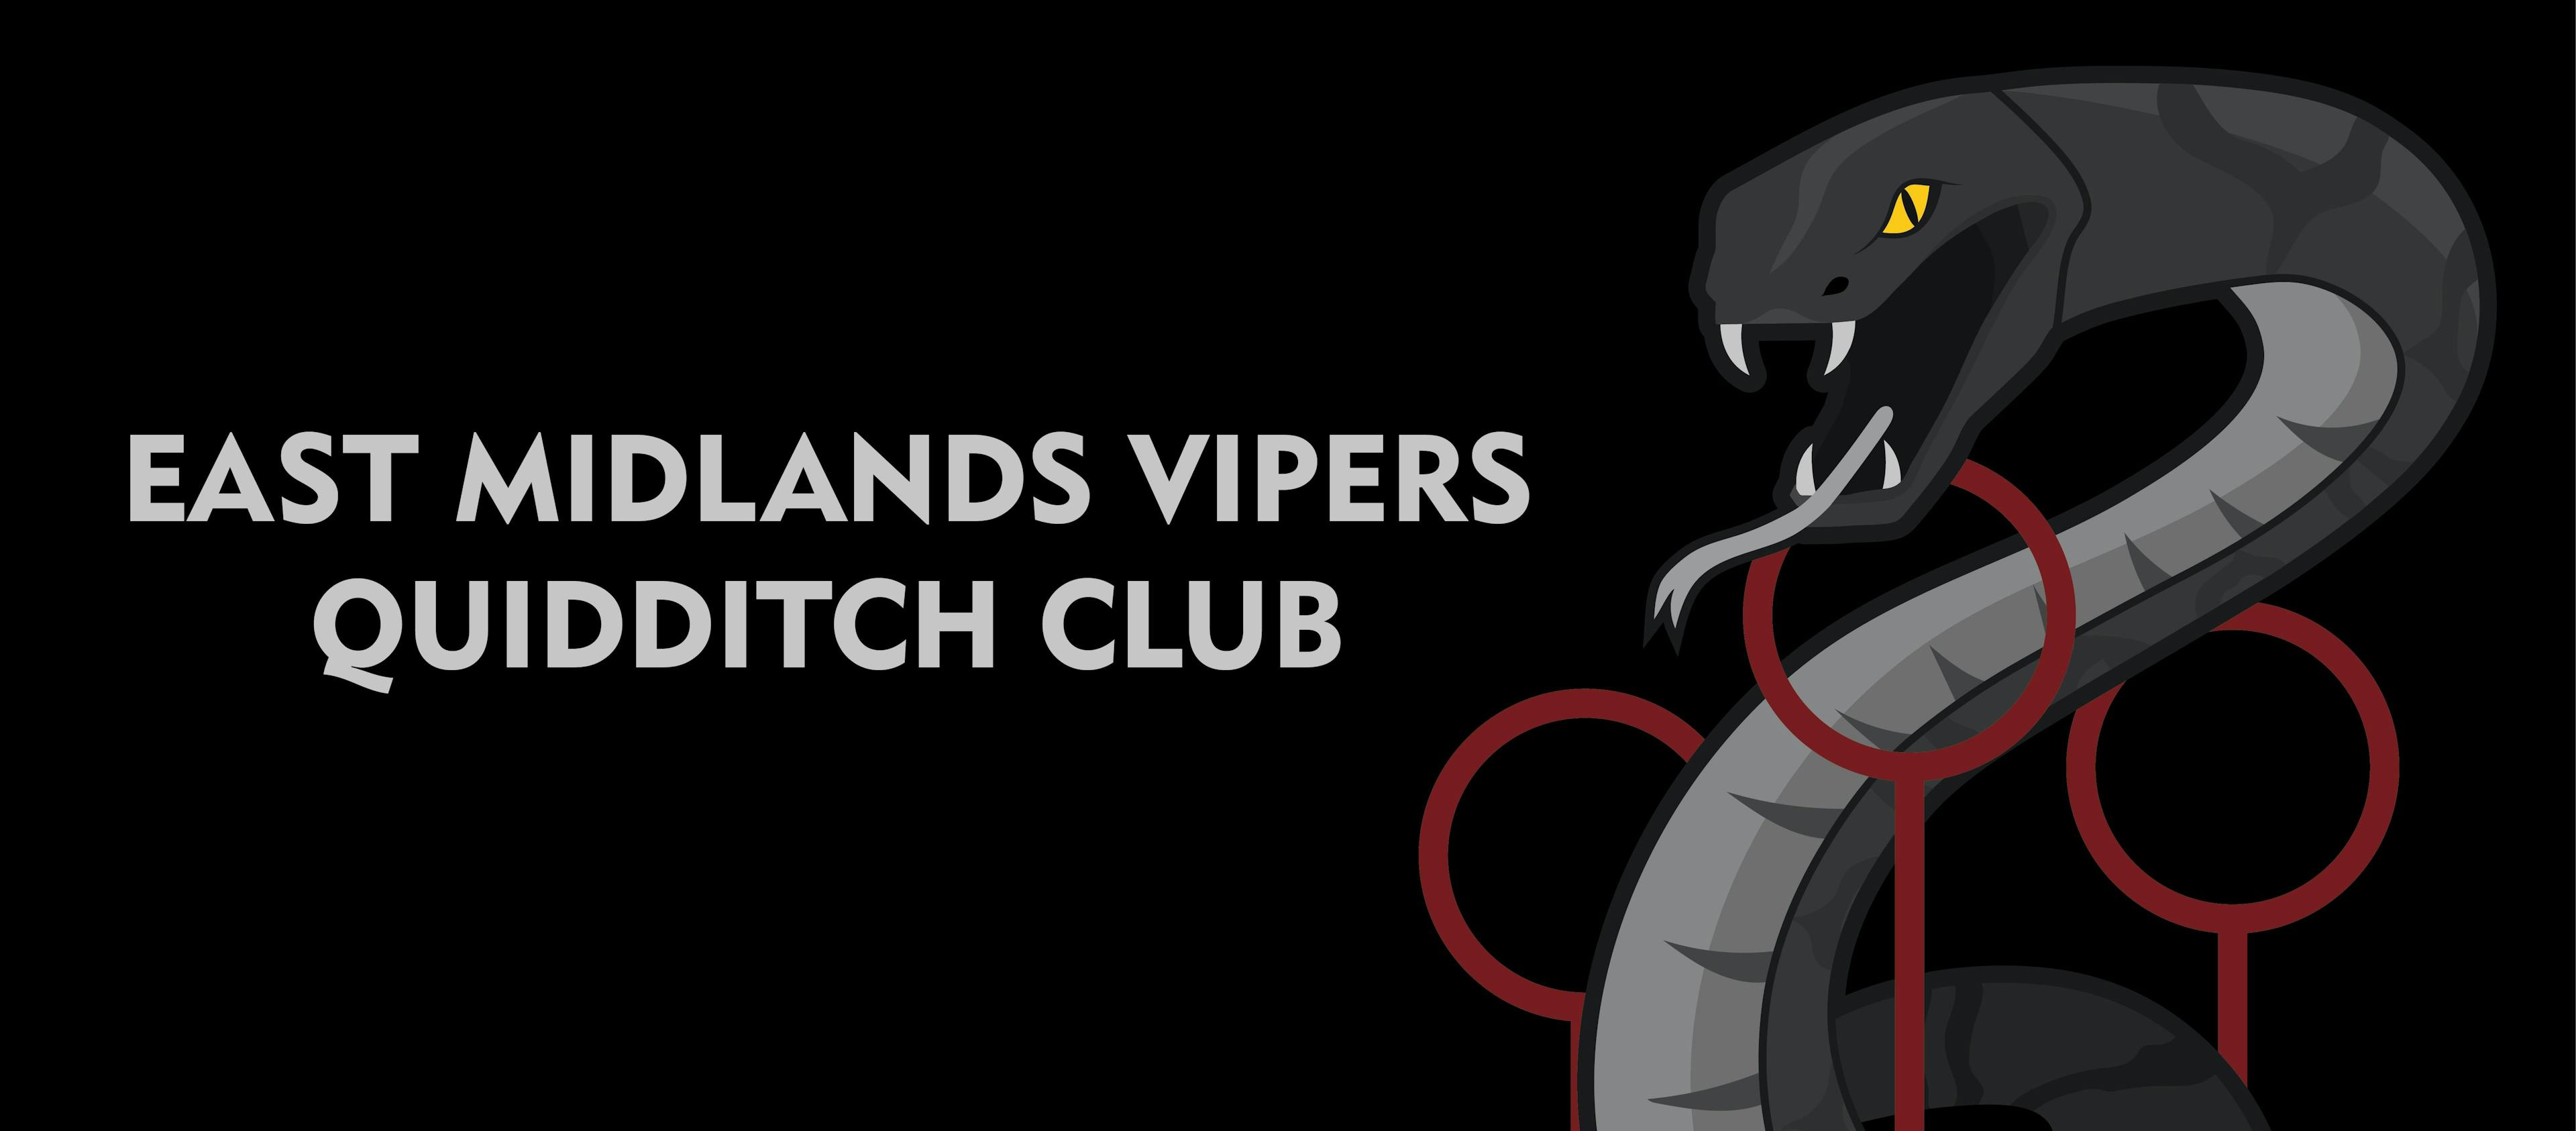 East Midlands Vipers